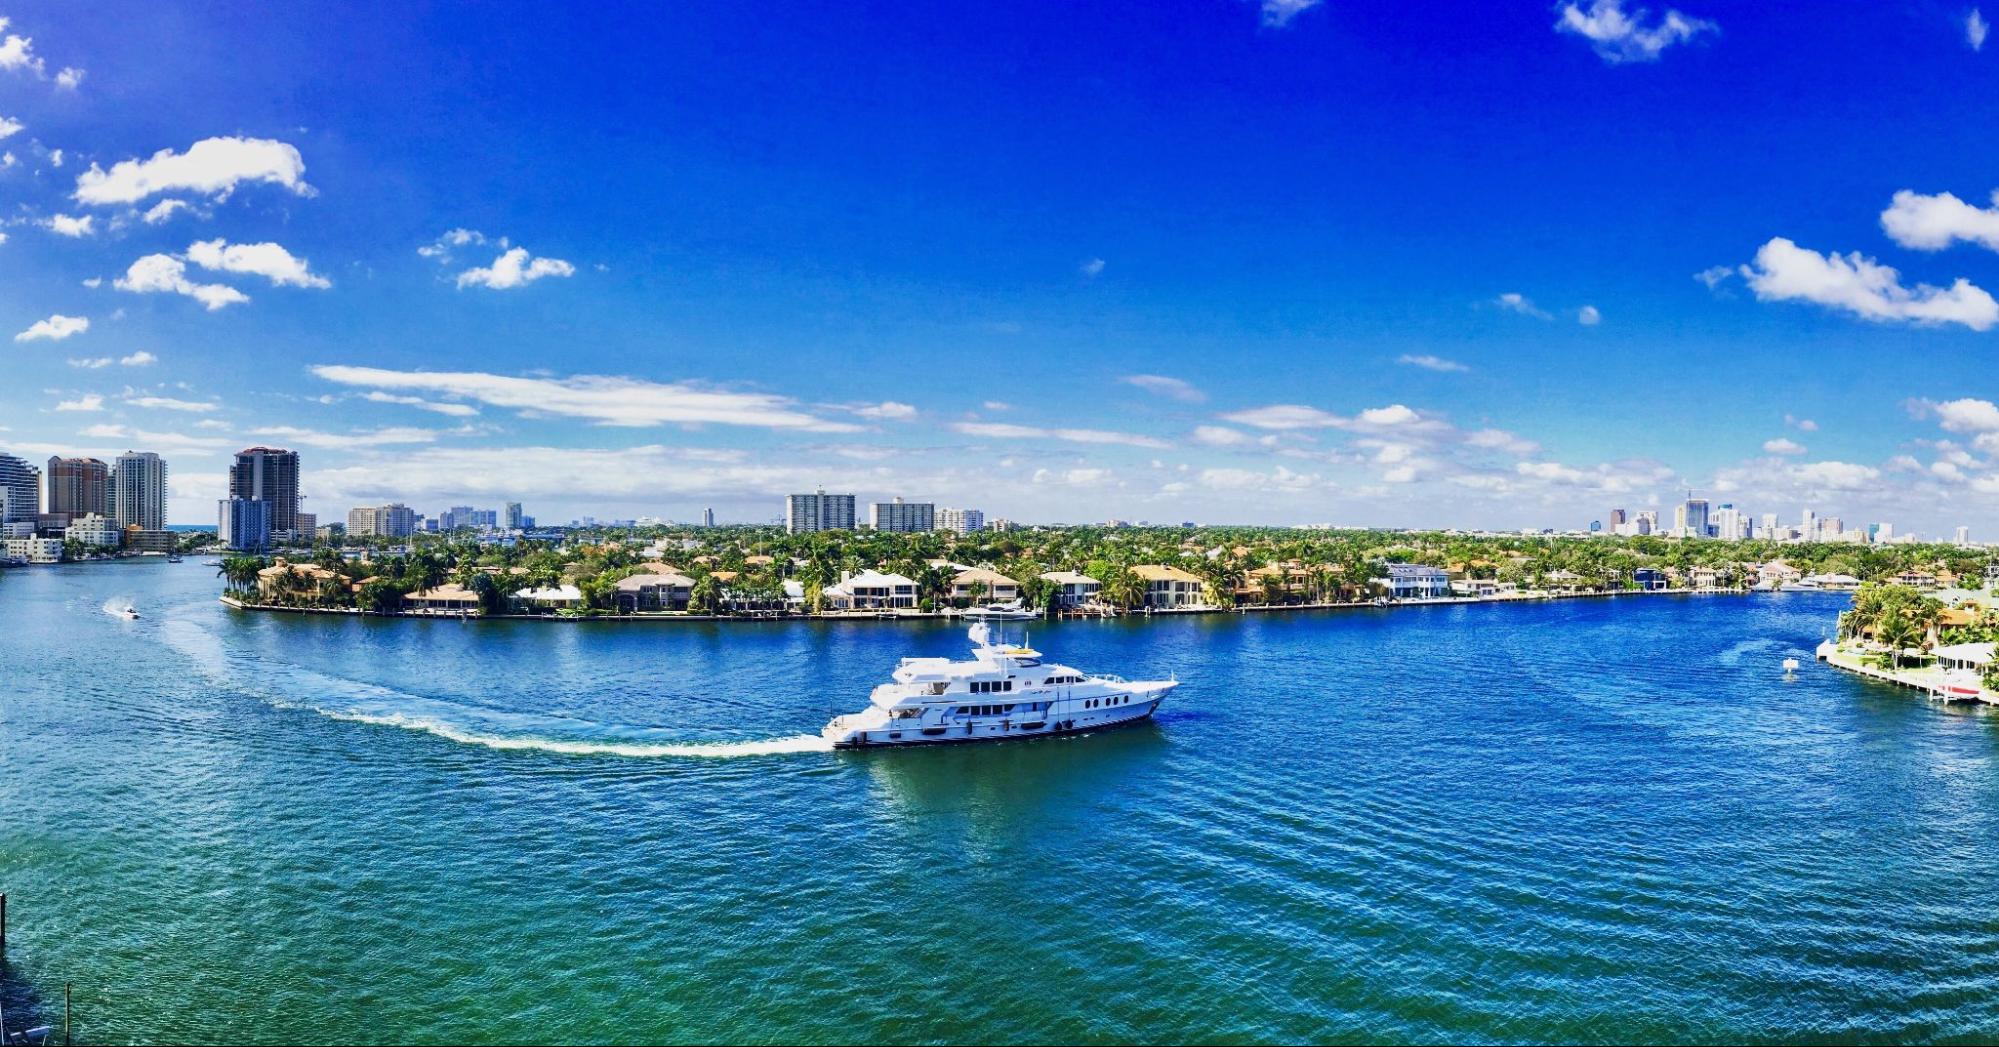 View of the water in Fort Lauderdale, Florida